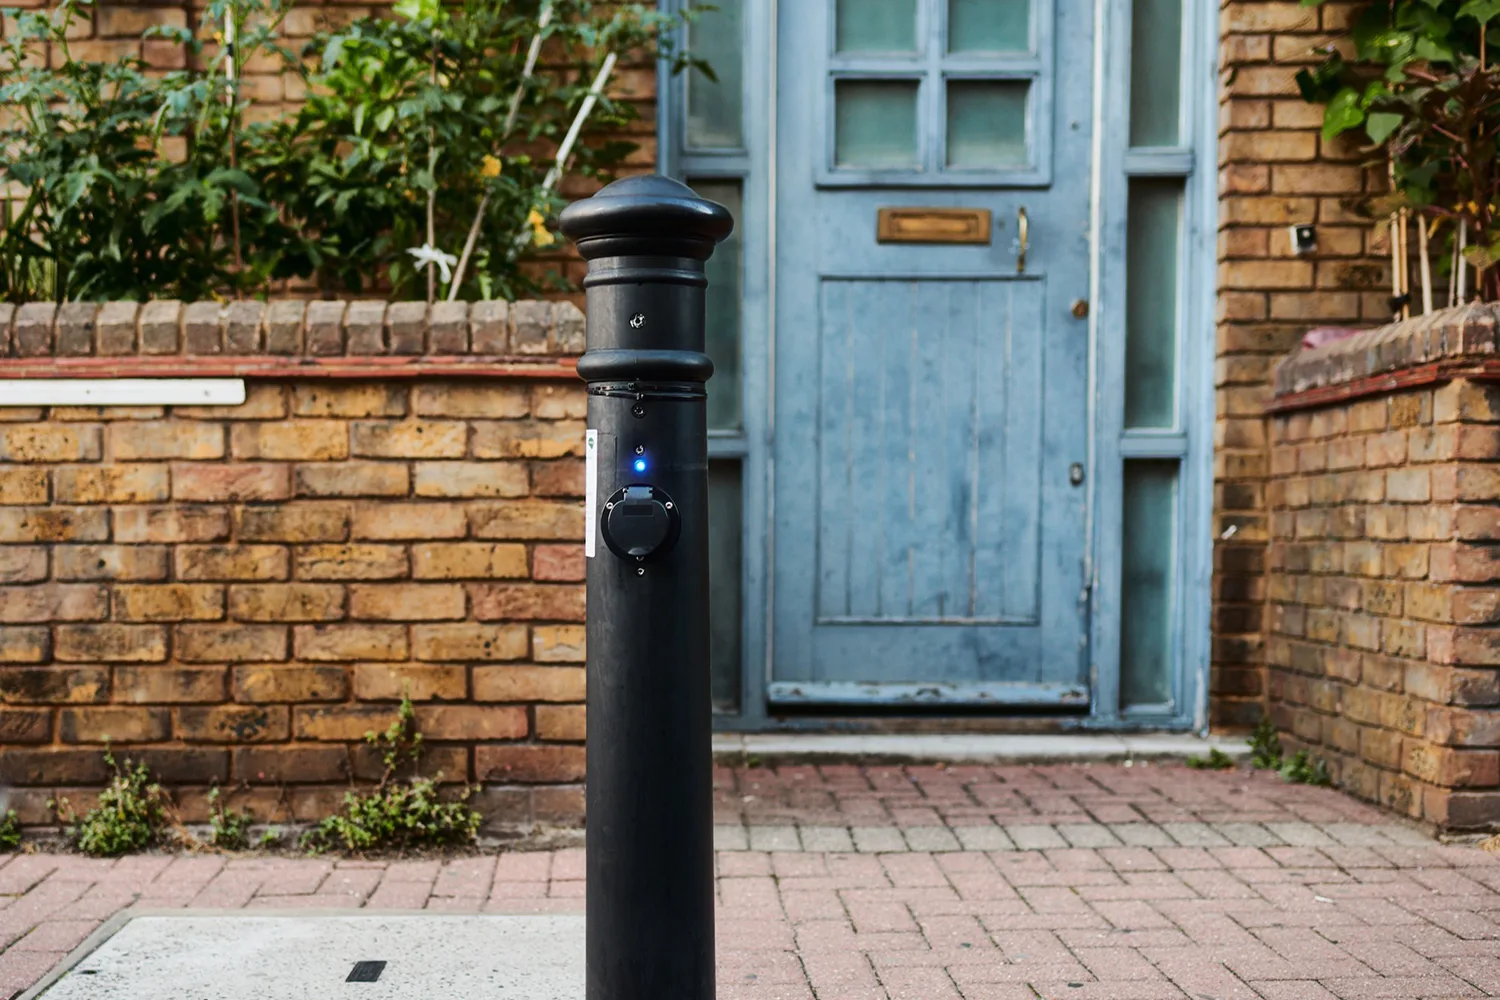 ubitricity EV bollard charge point for charging electric vehicles near homes during long parking times such as over night.